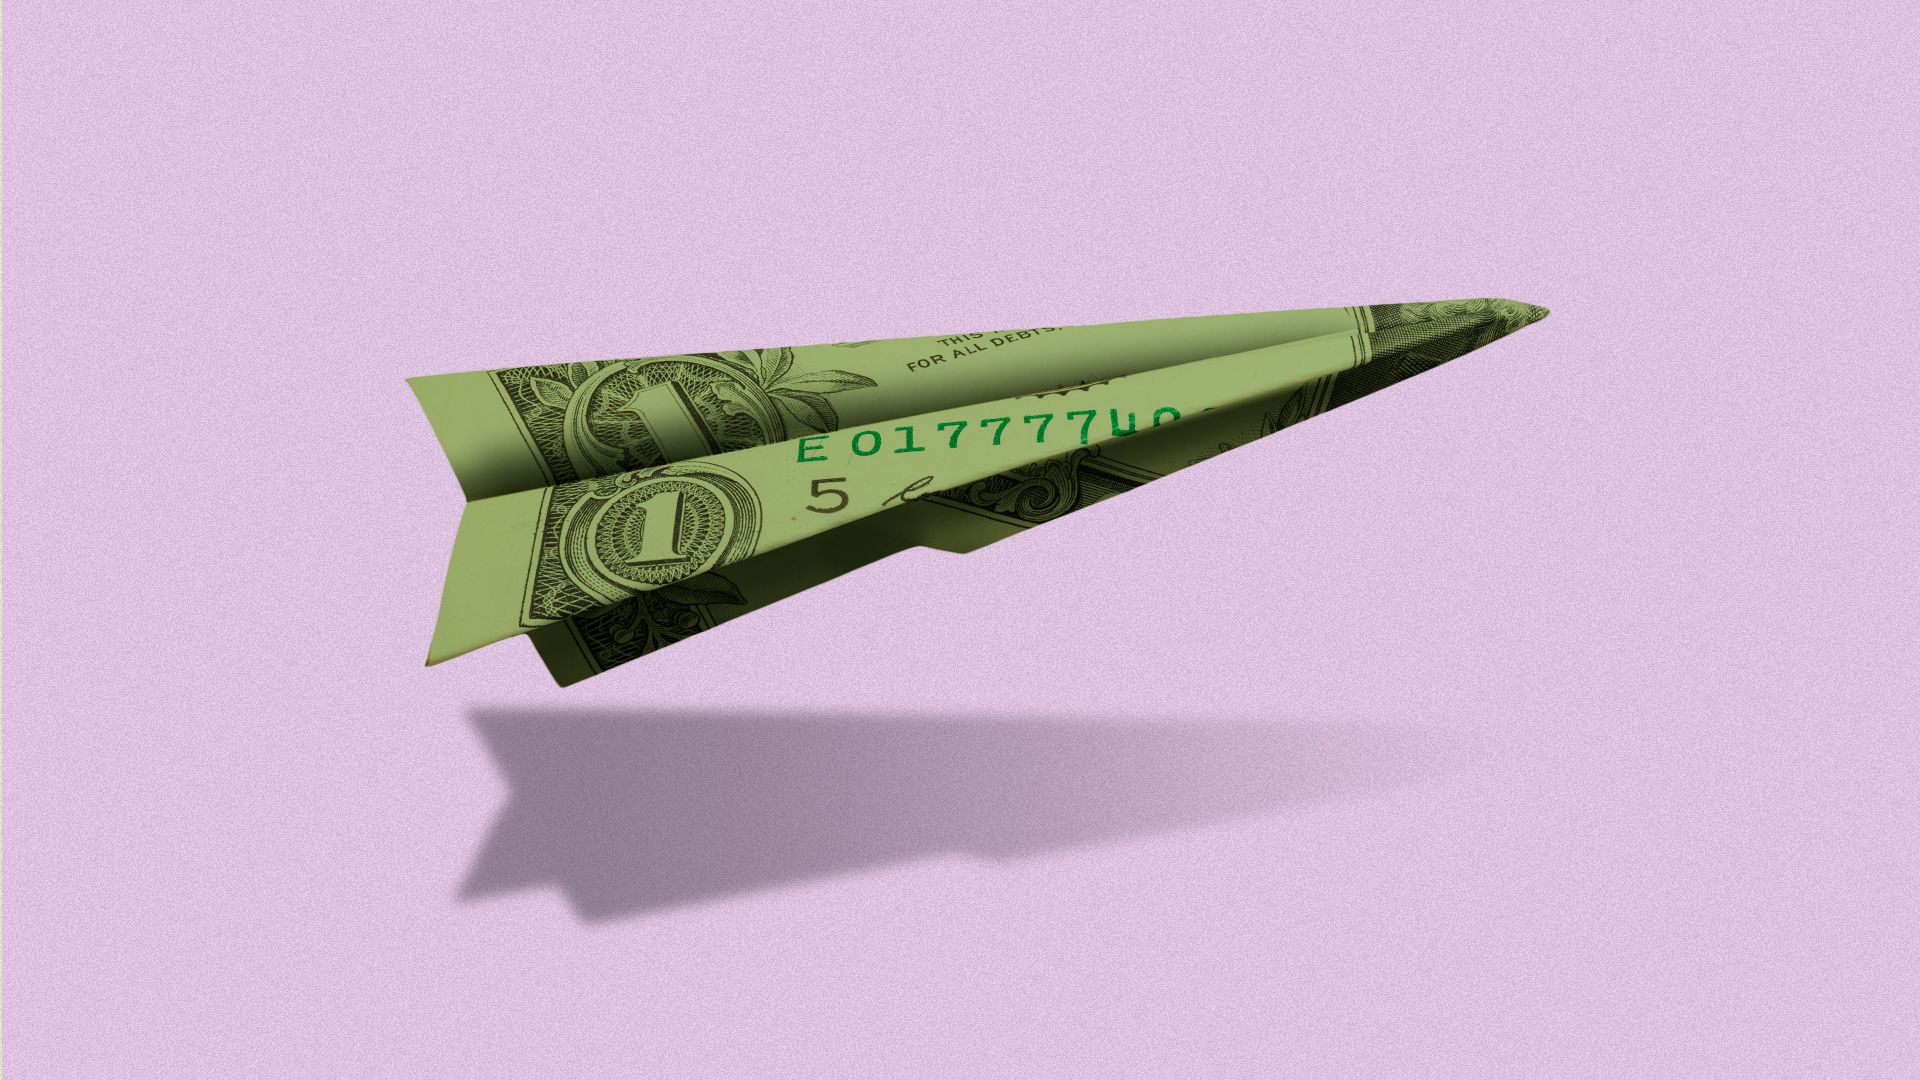 Illustration of an origami airplane/rocket made from paper money. 